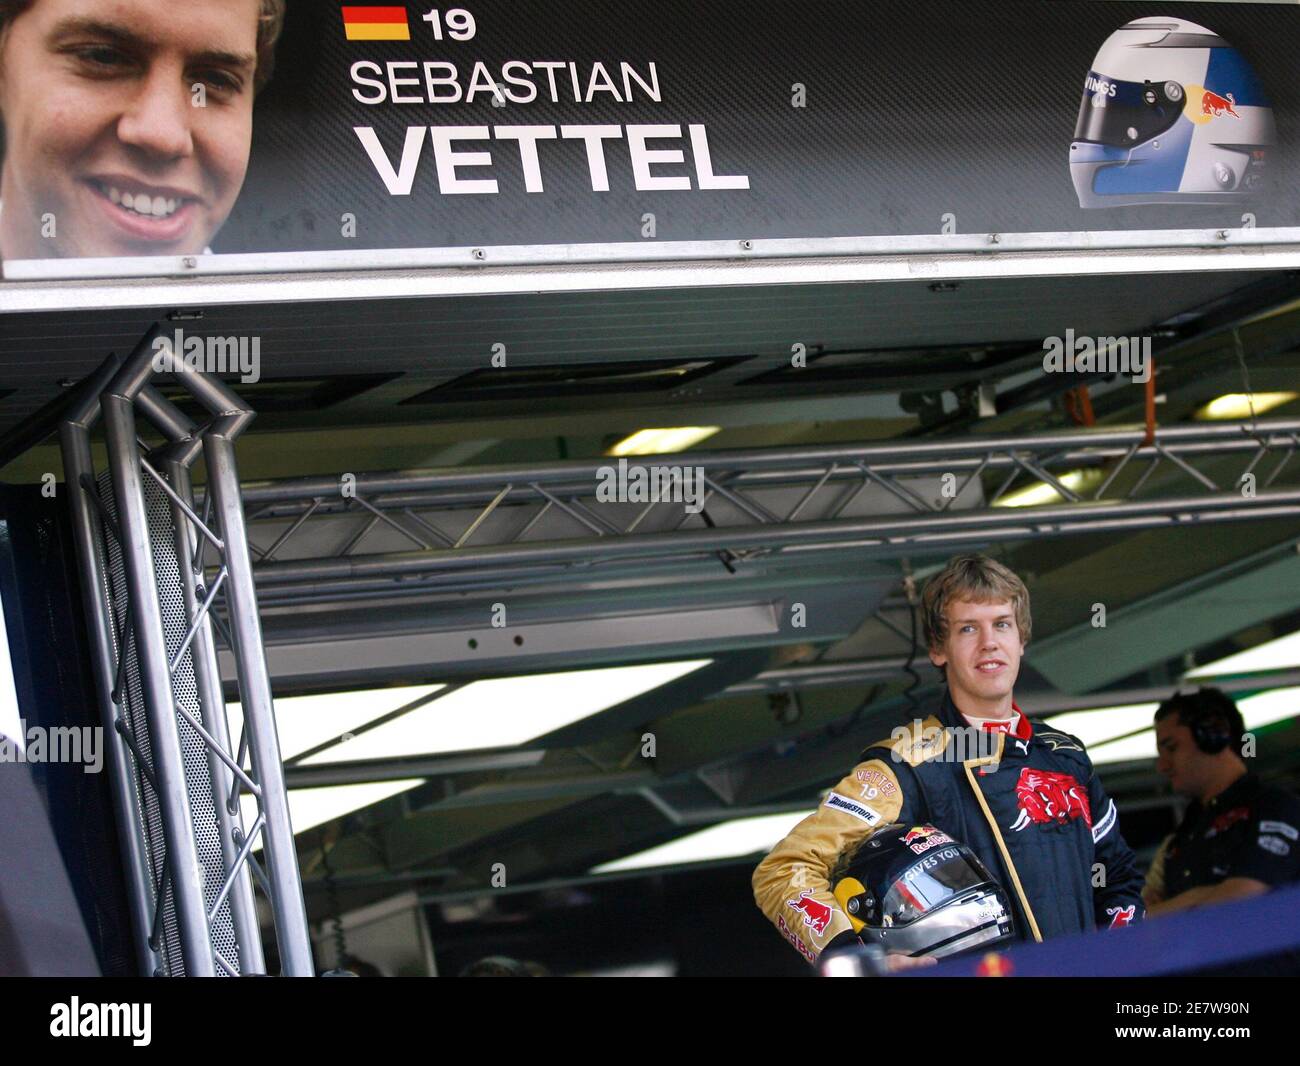 Toro Rosso Formula One driver Sebastian Vettel of Germany poses for photographers in the pit during the first free practice for the Hungarian F1 Grand Prix at the Hungaroring near Budapest August 3, 2007. The Hungarian F1 Grand Prix will take place on Sunday, August 5.  REUTERS/Ivan Milutinovic (HUNGARY) Stock Photo